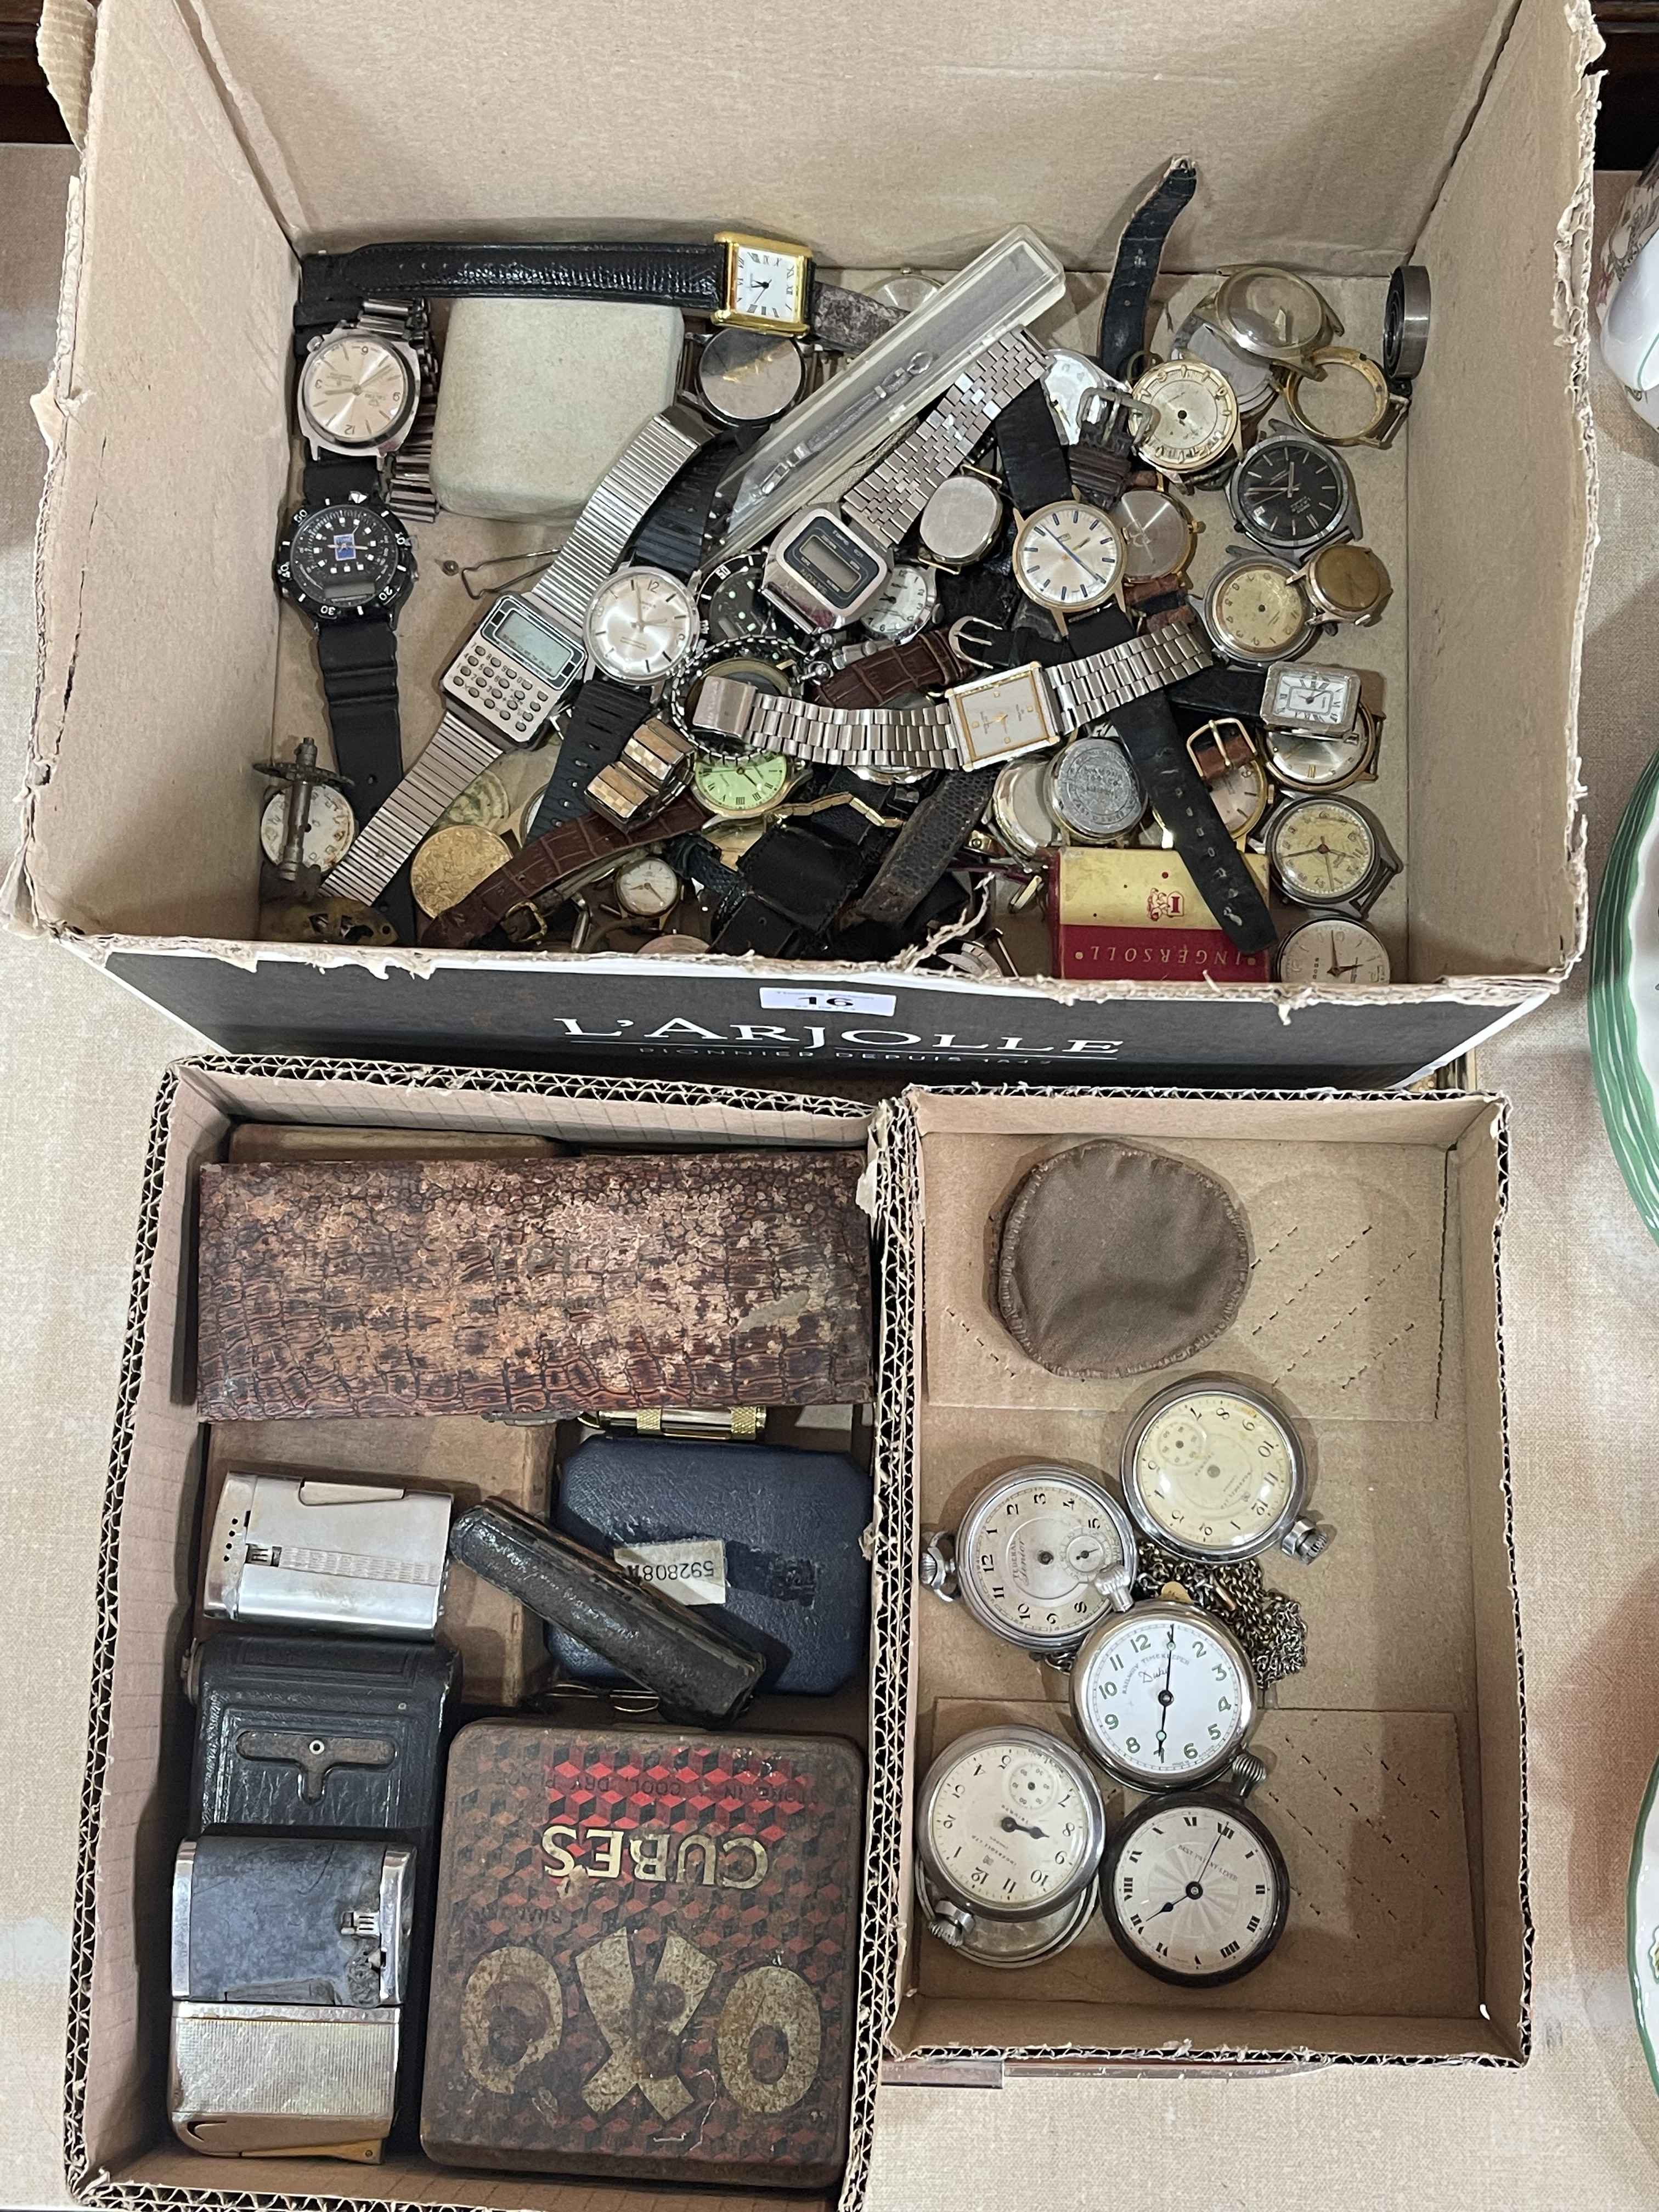 Collection of wrist and pocket watches, lighters, cheroot holder, etc.